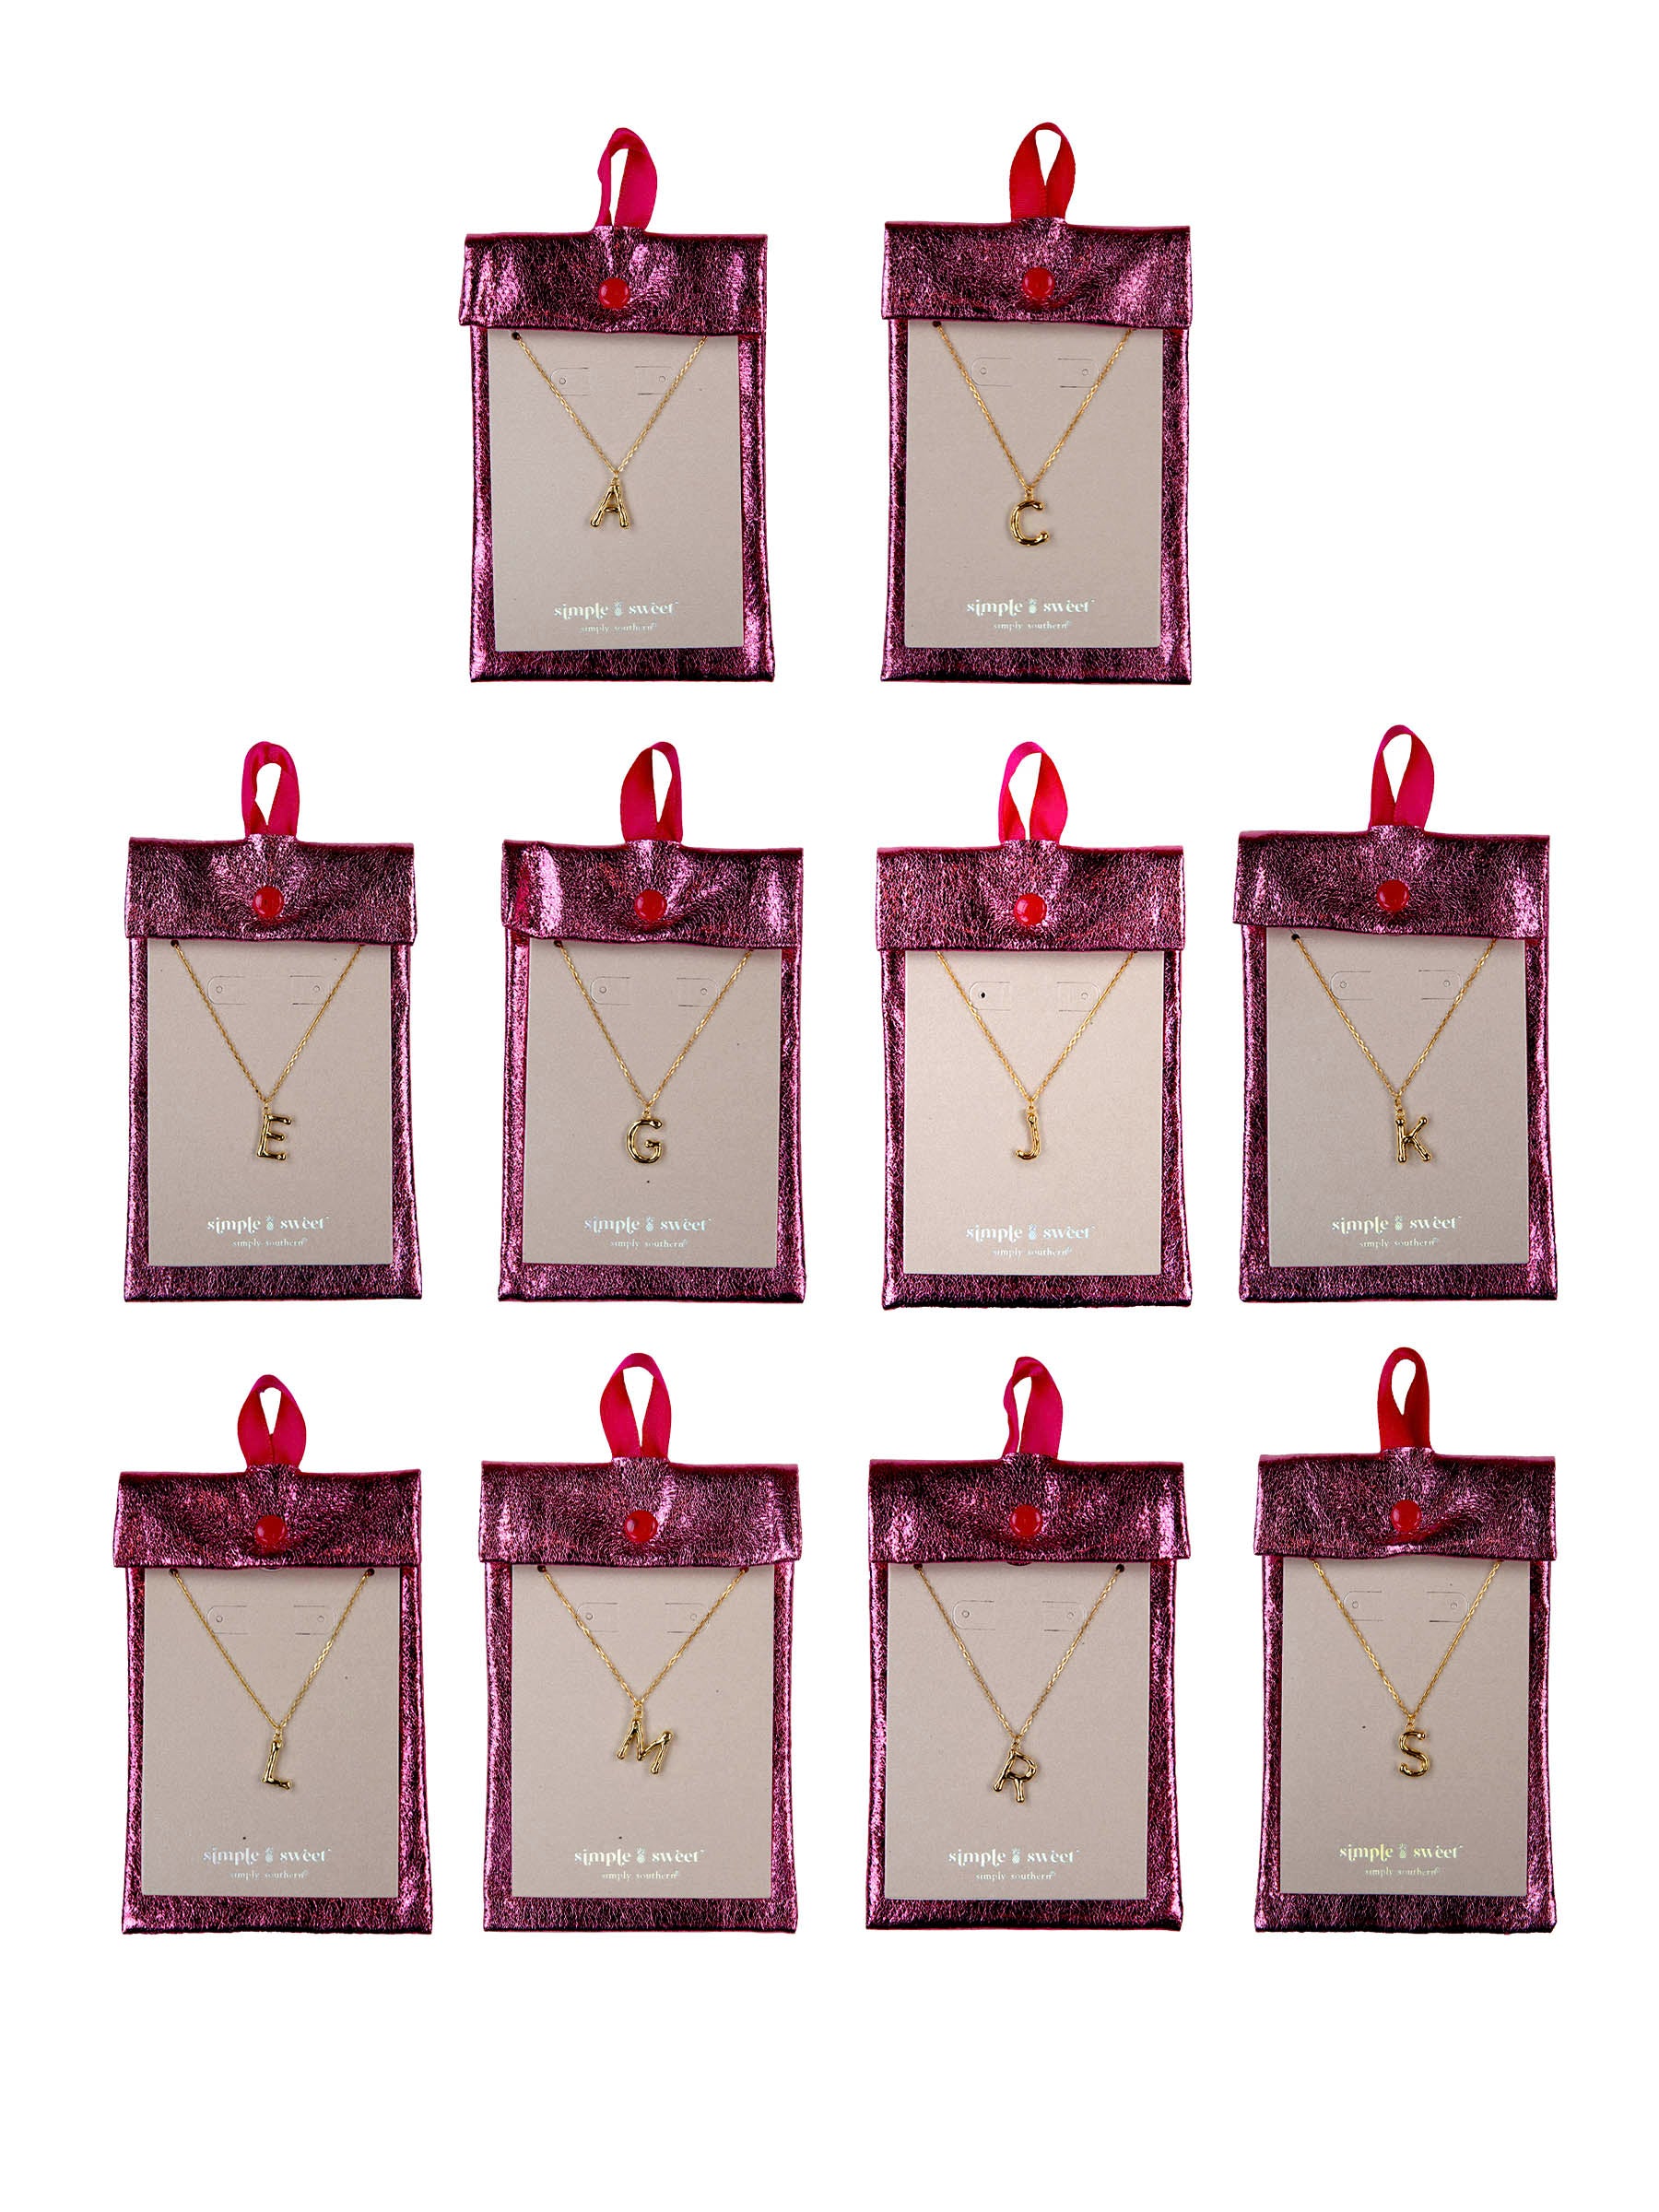 Initial Necklaces by Simply Southern